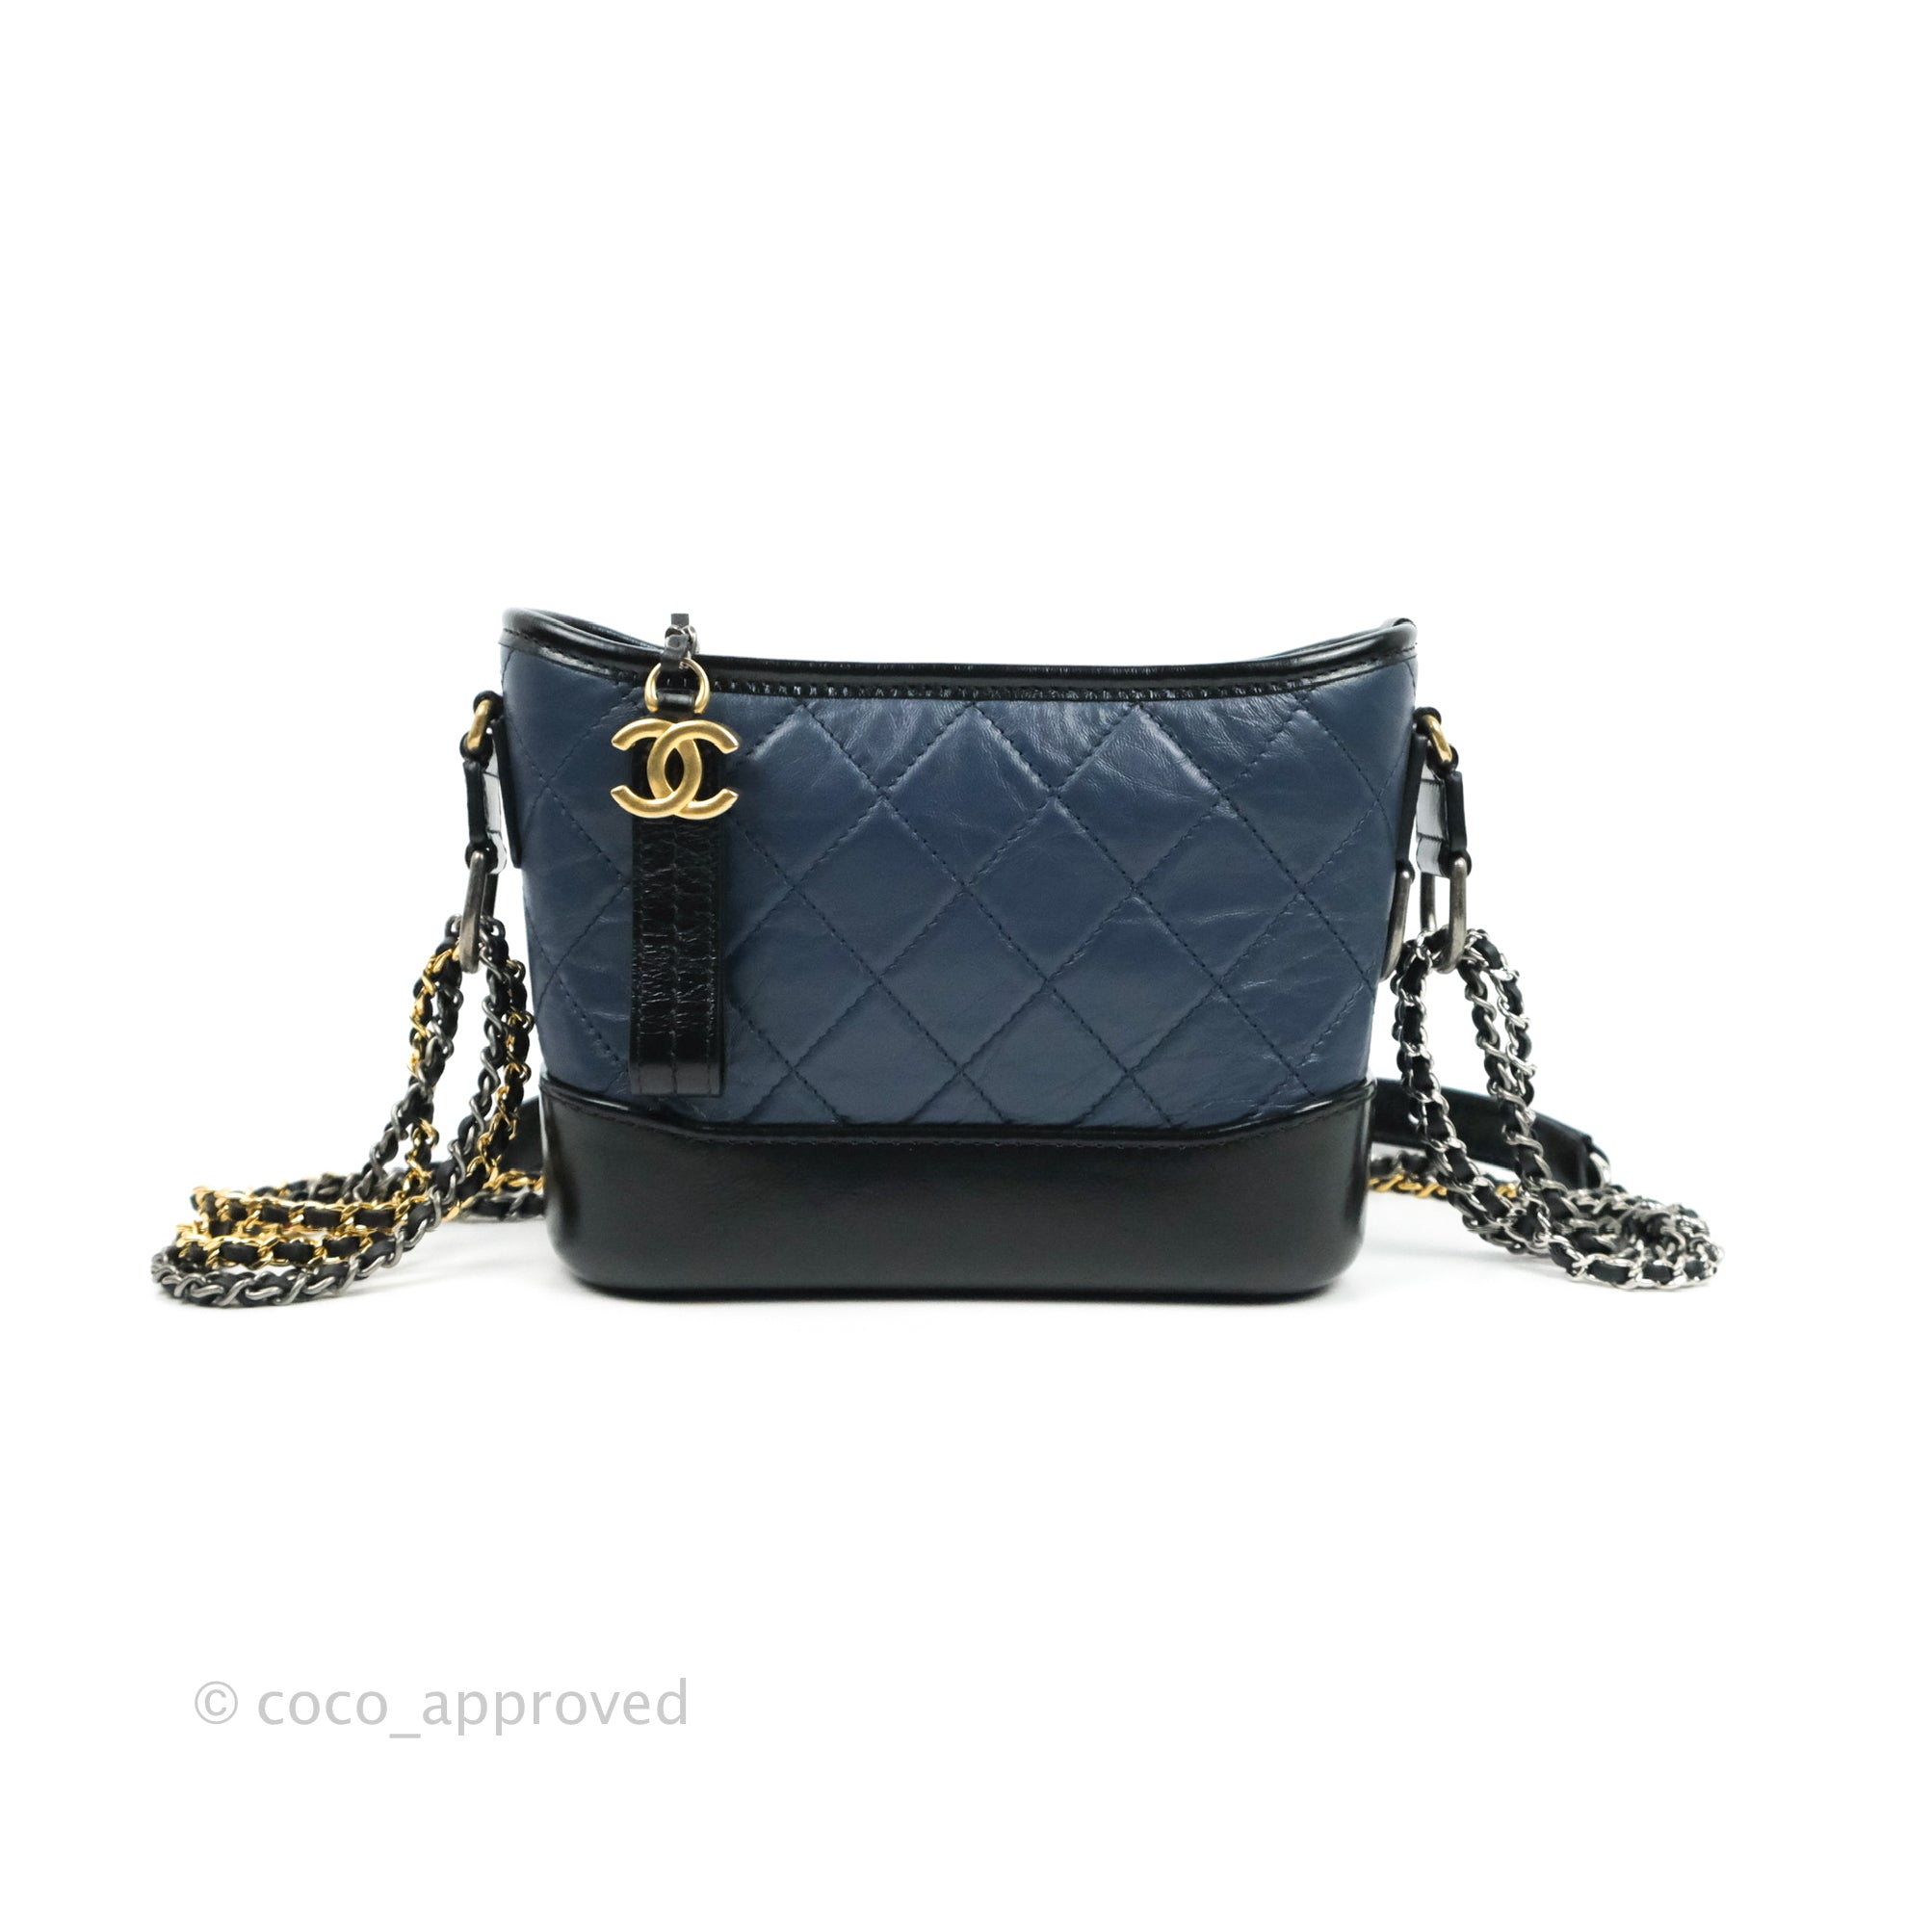 Chanel Quilted Gabrielle Hobo Beige / Black Aged Calfskin